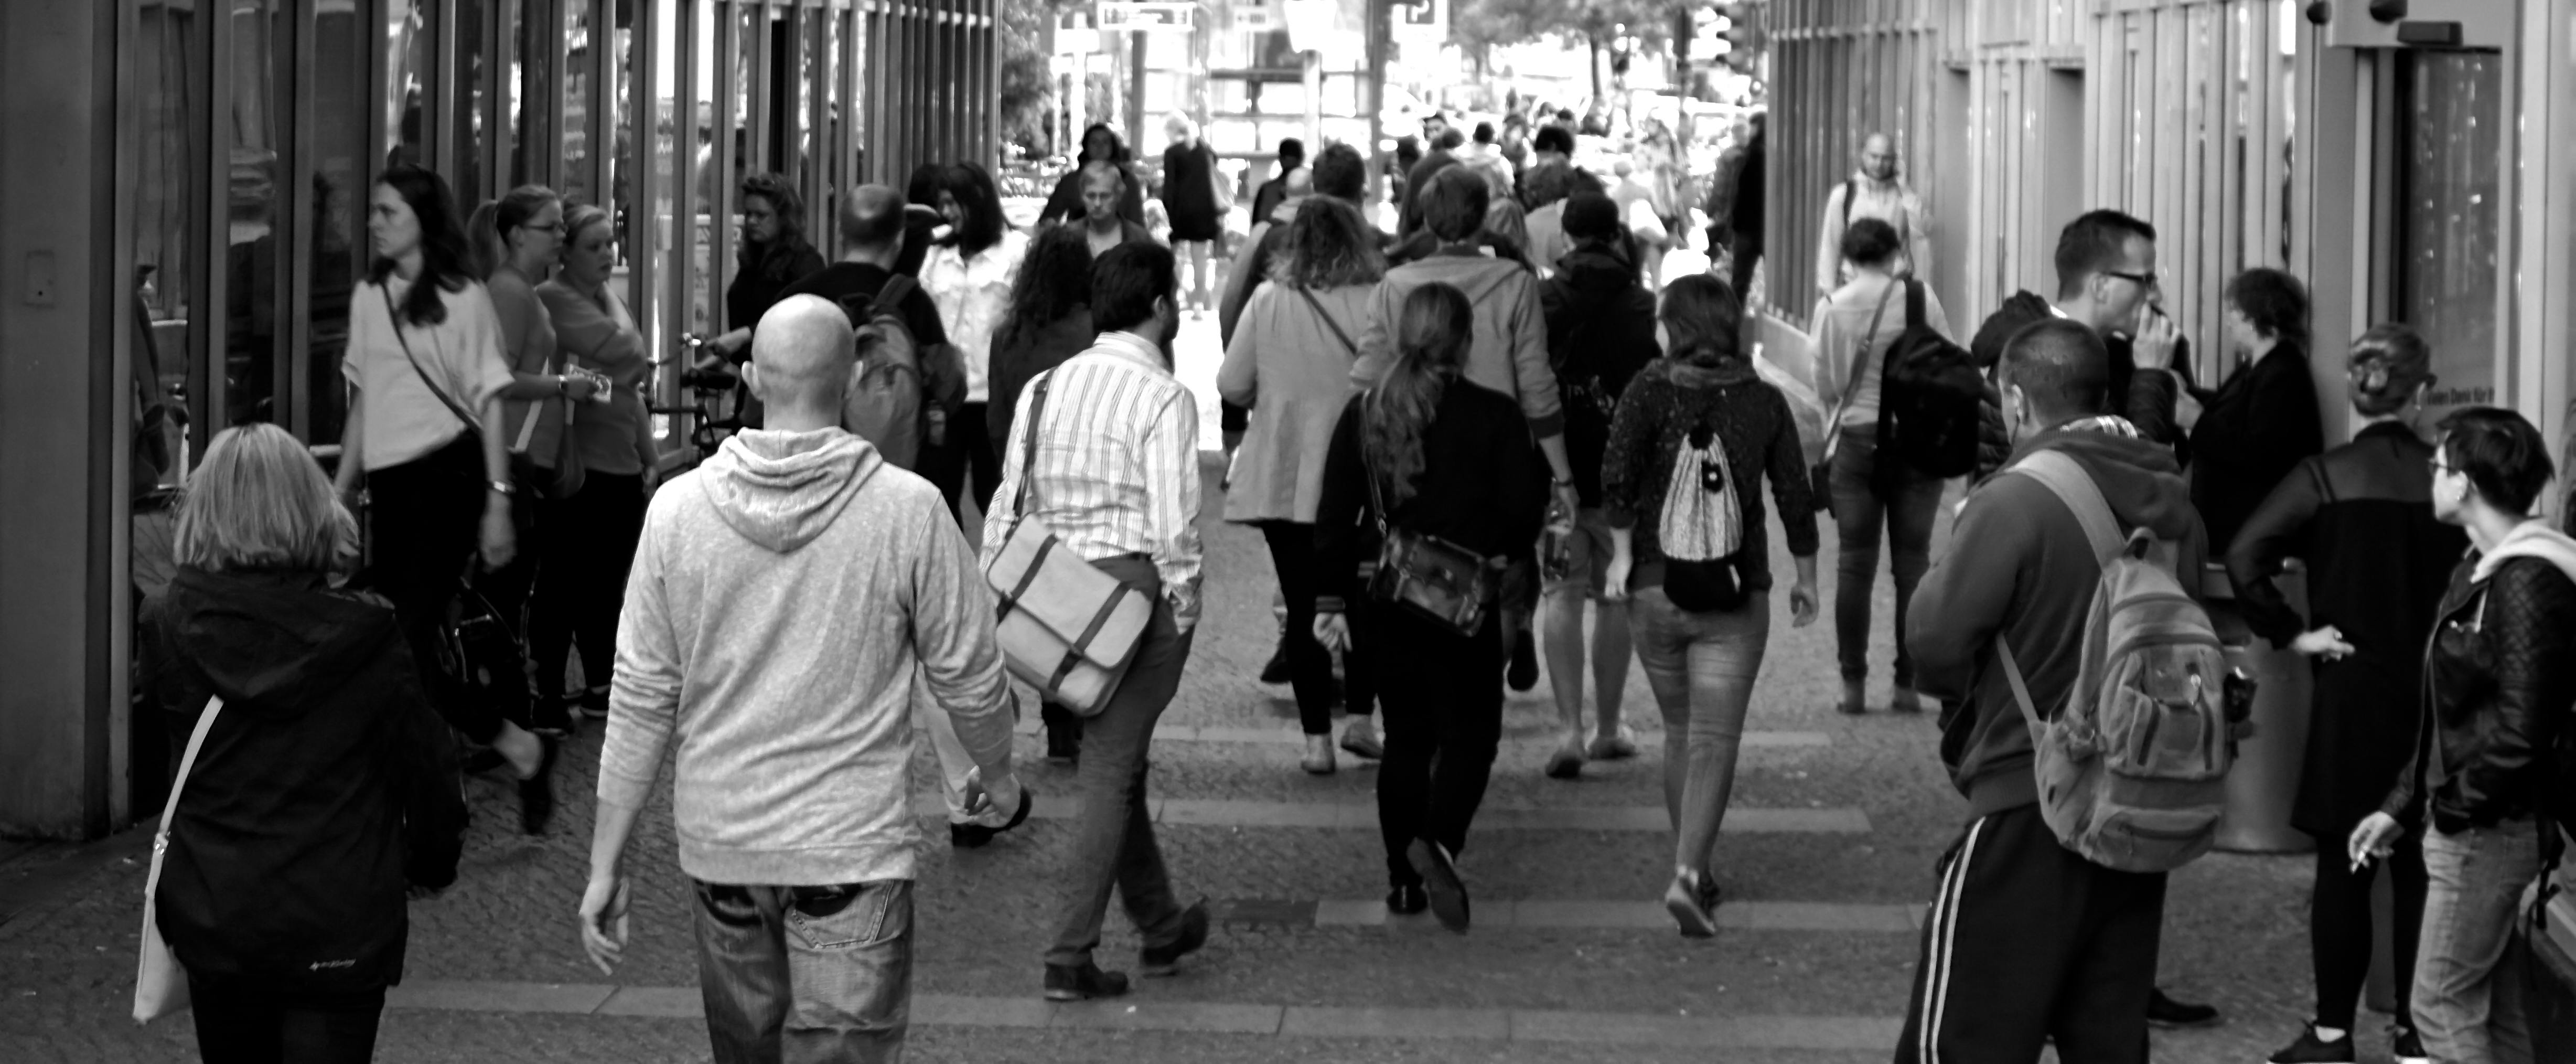 Photograph of people walking in the city